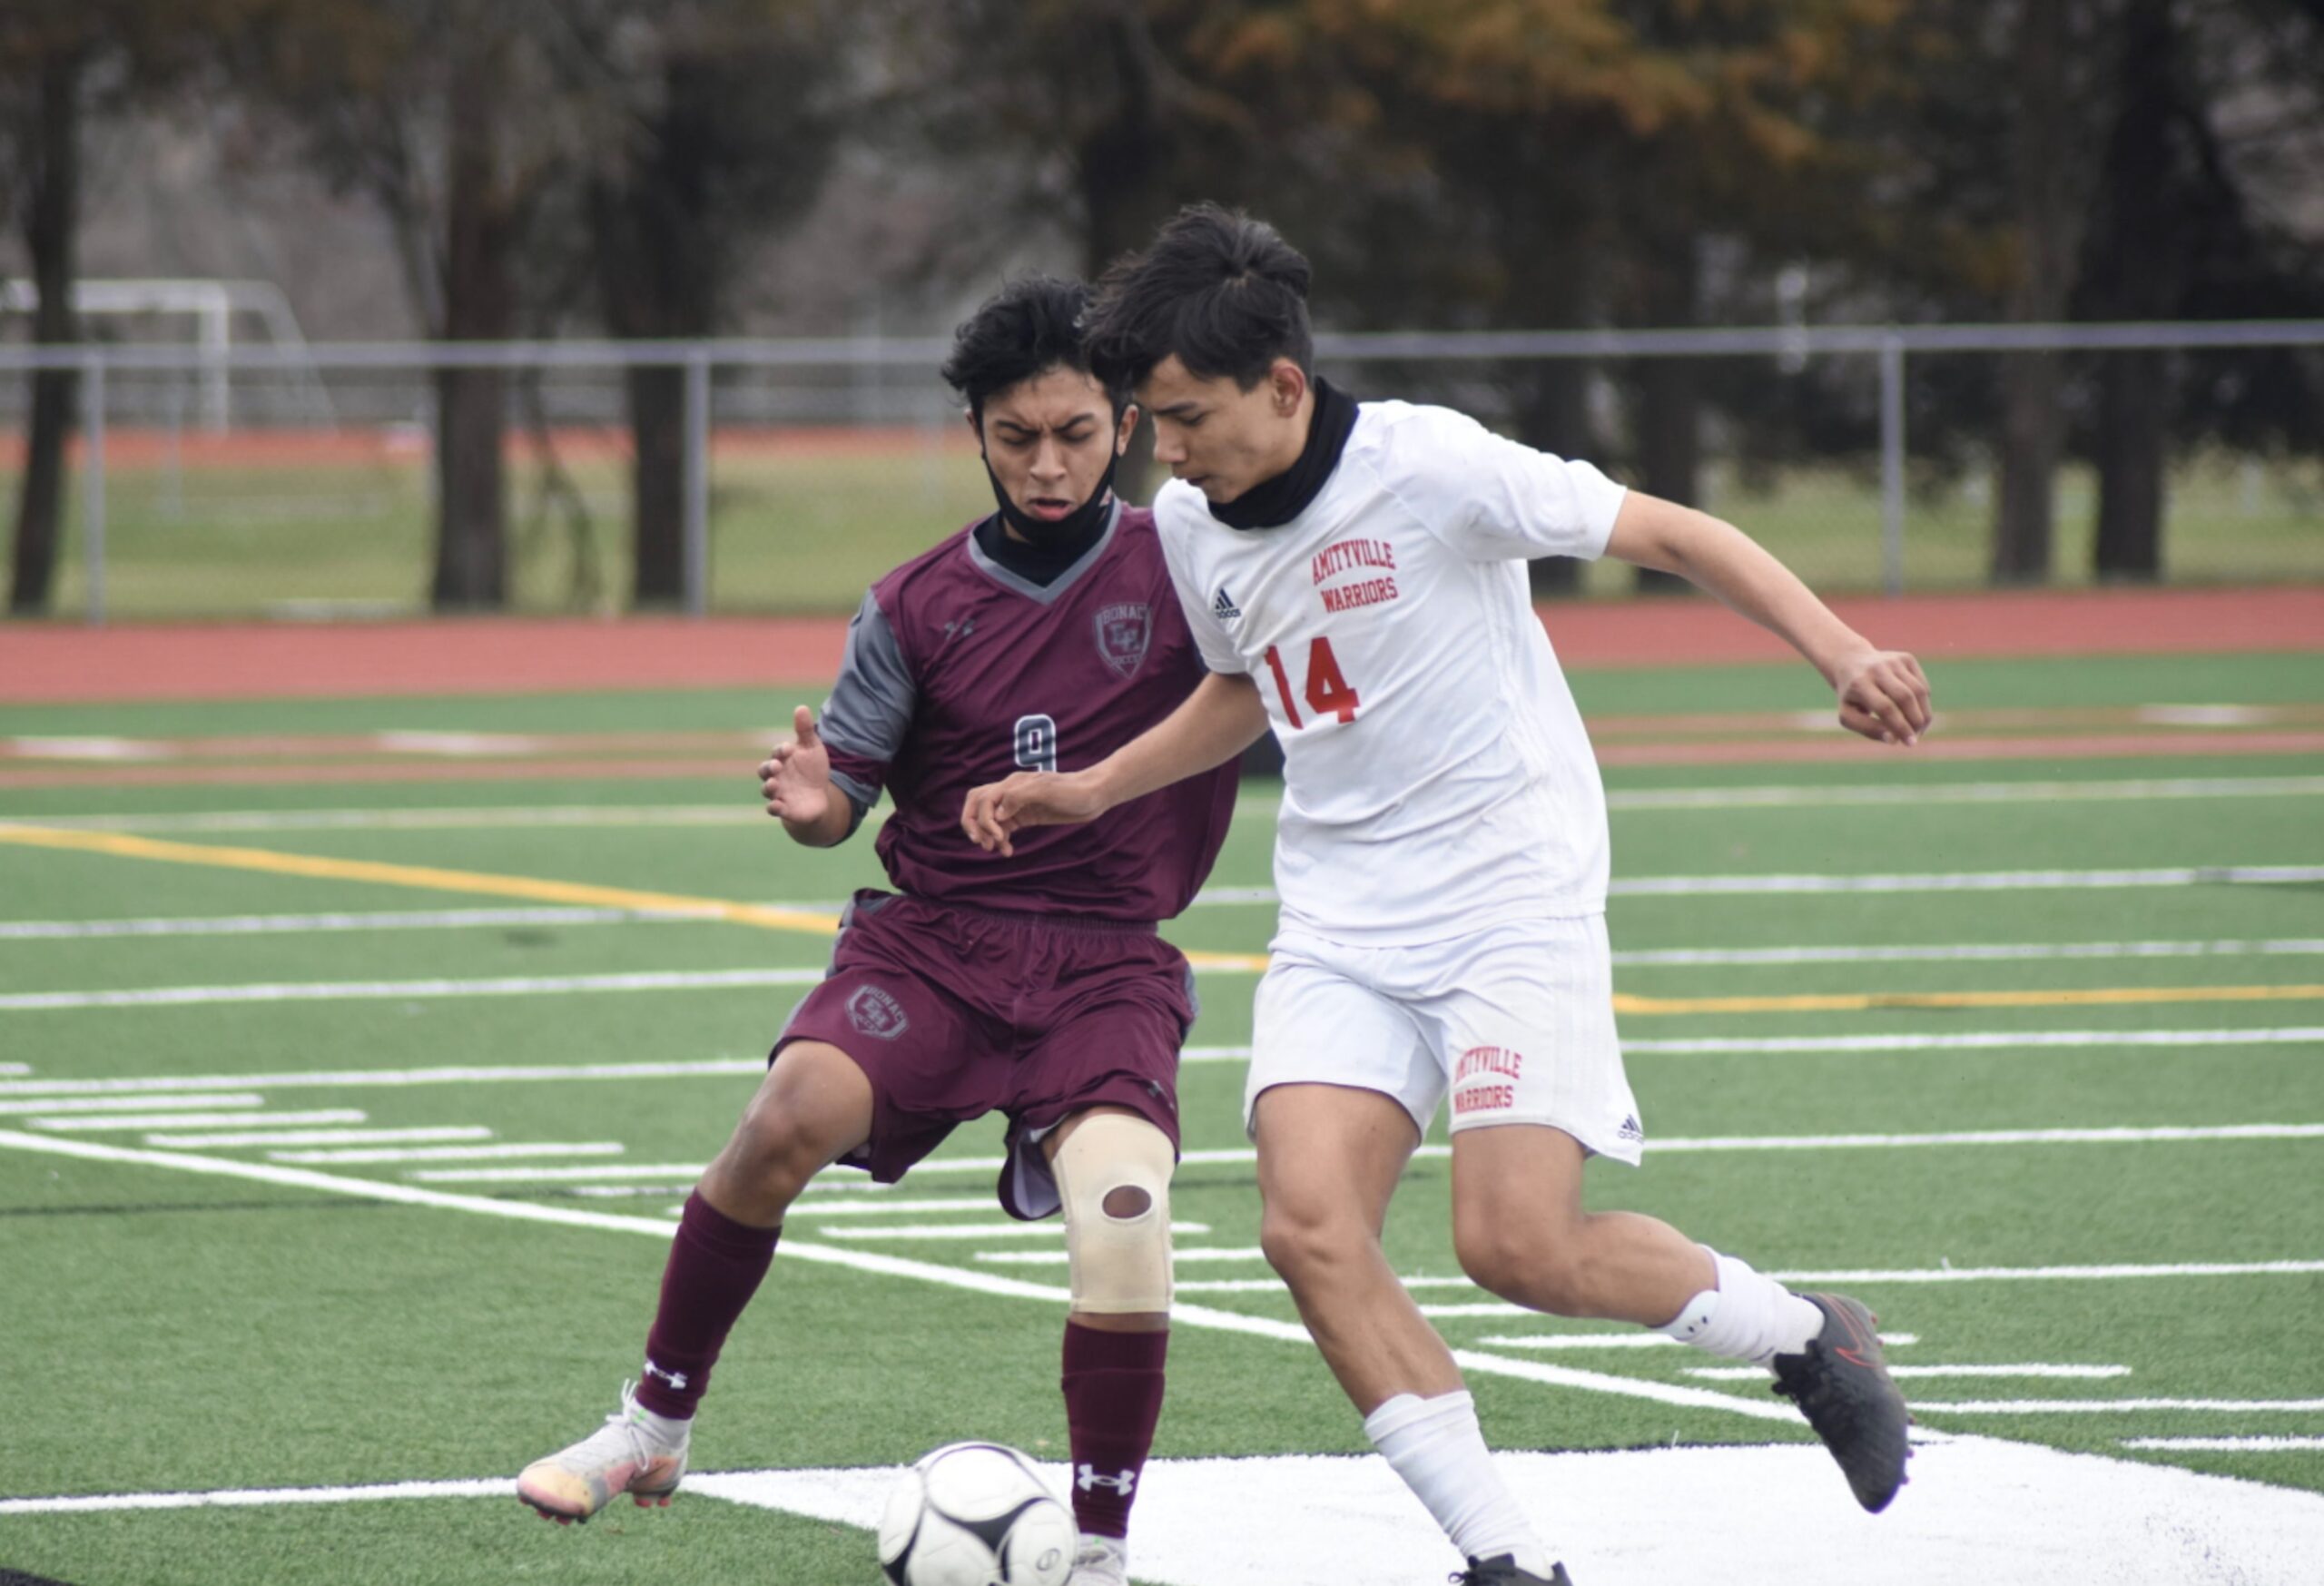 East Hampton's Eric Armijos scored three goals and assisted on the other in the Bonackers' 4-1 win over Bayport-Blue Point September 23. DREW BUDD